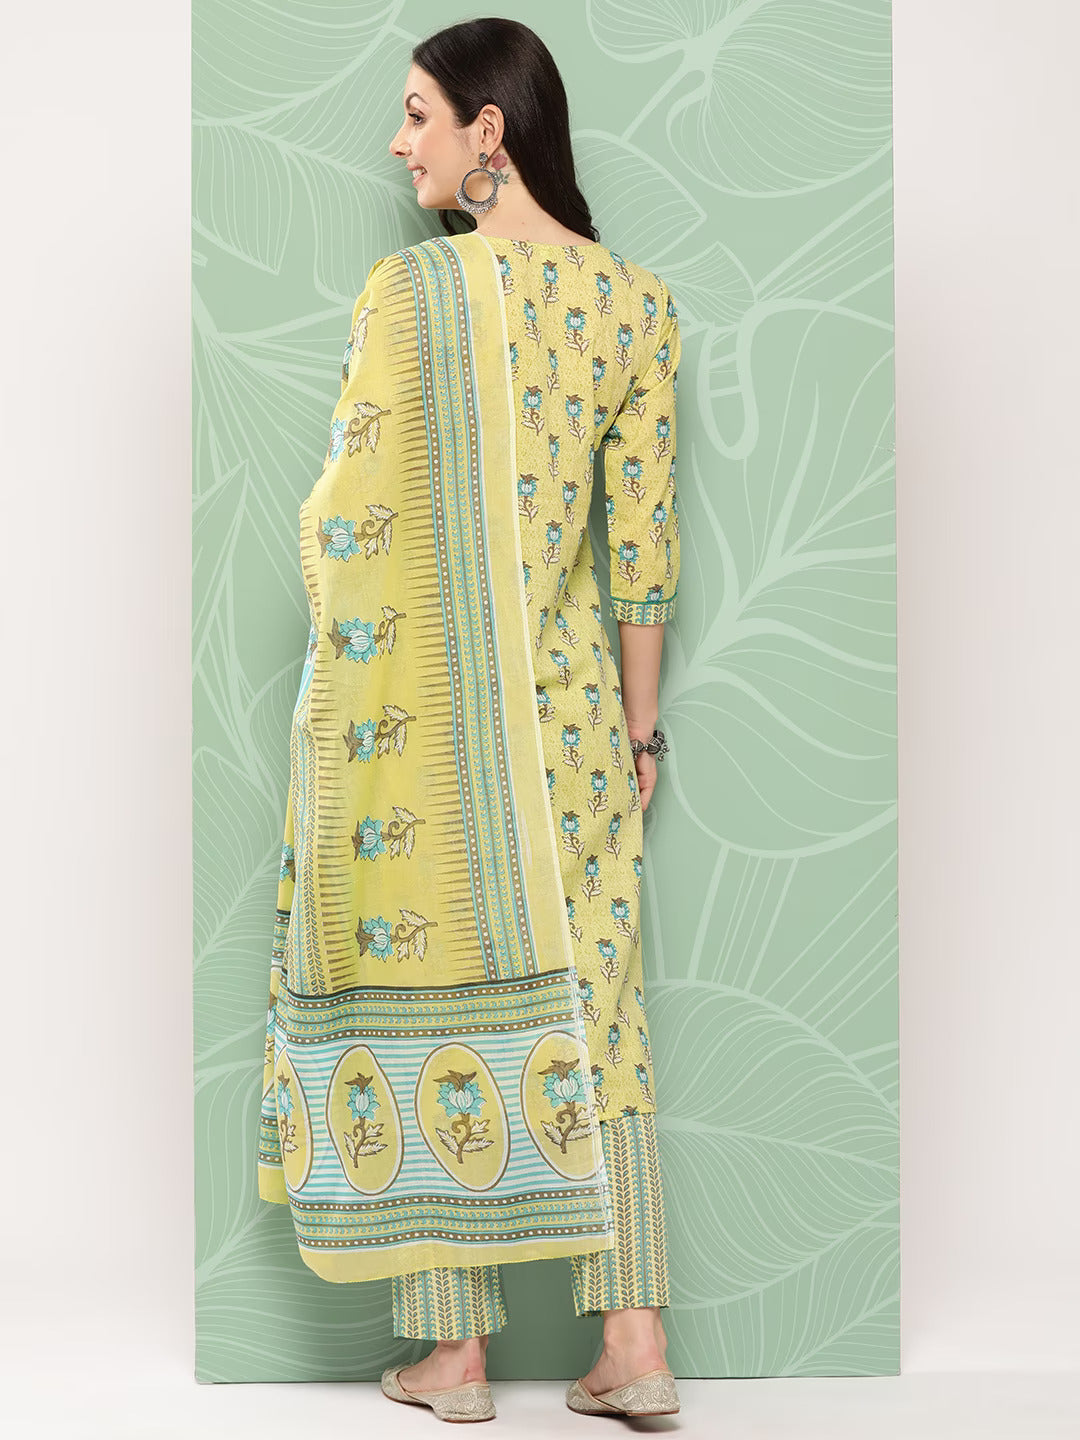 Floral-Printed-Regular-Pure-Cotton-Kurta-With-Trousers-&-With-Dupatta-1371SKDOL